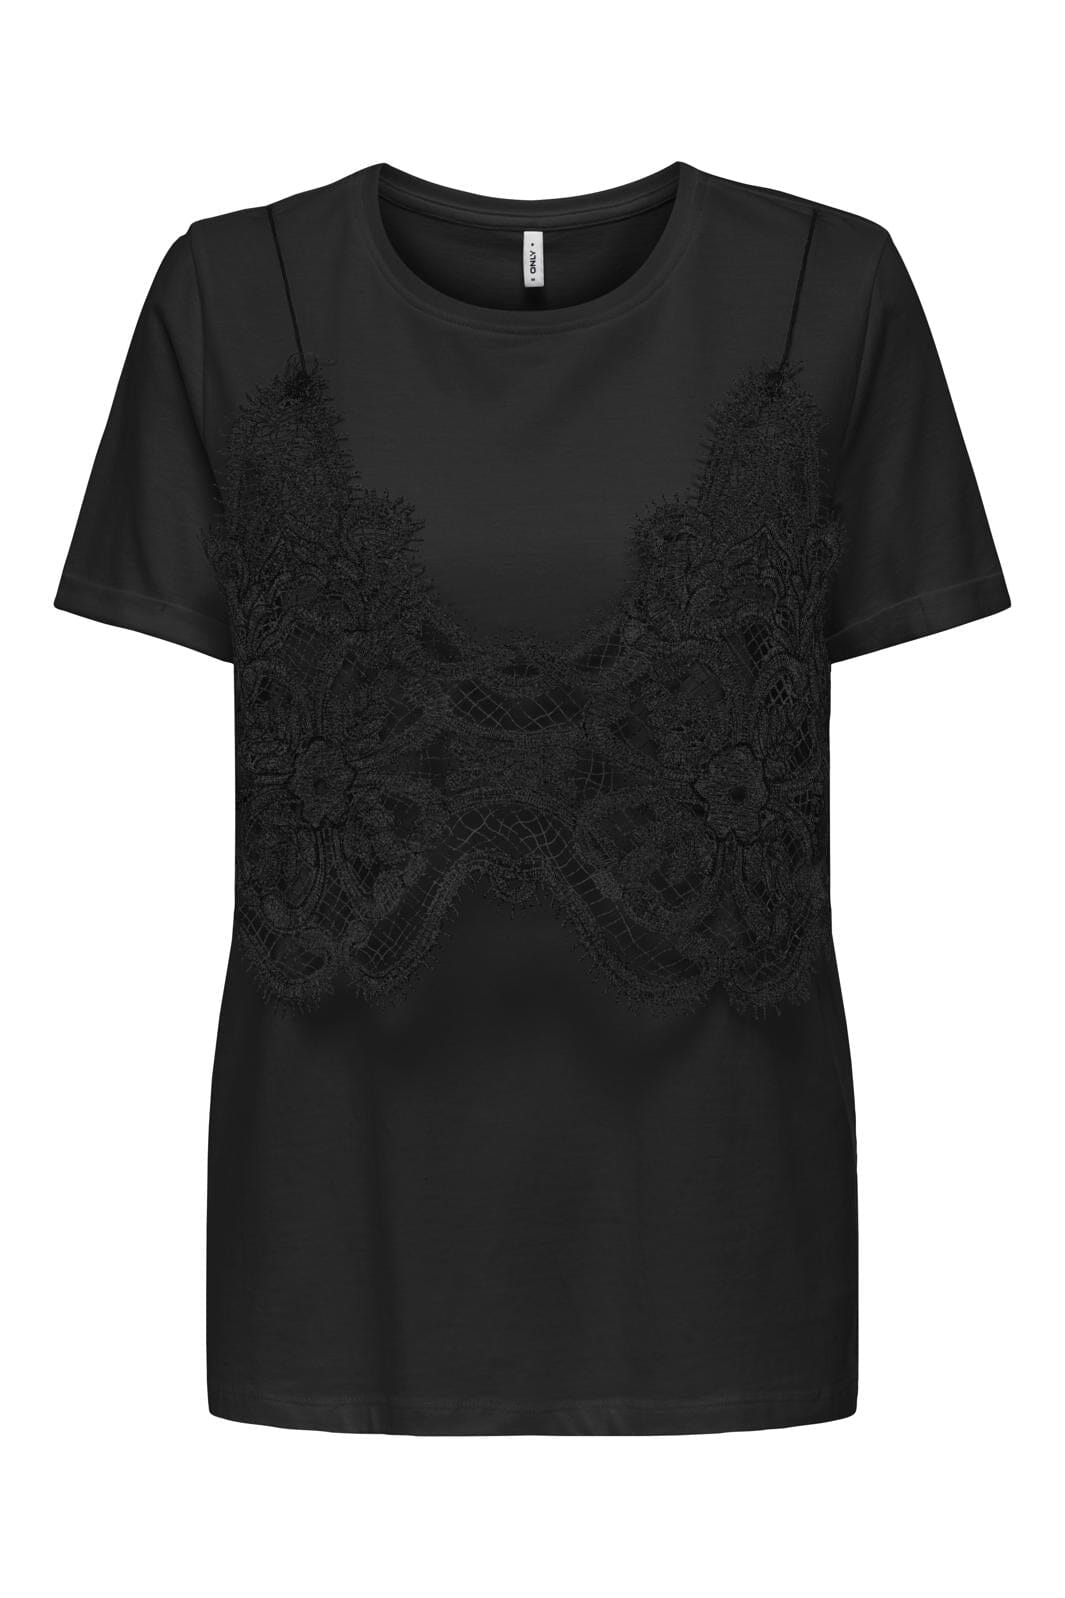 Only - Onljenny S/S Mix Top - 4649340 Black Lace Top